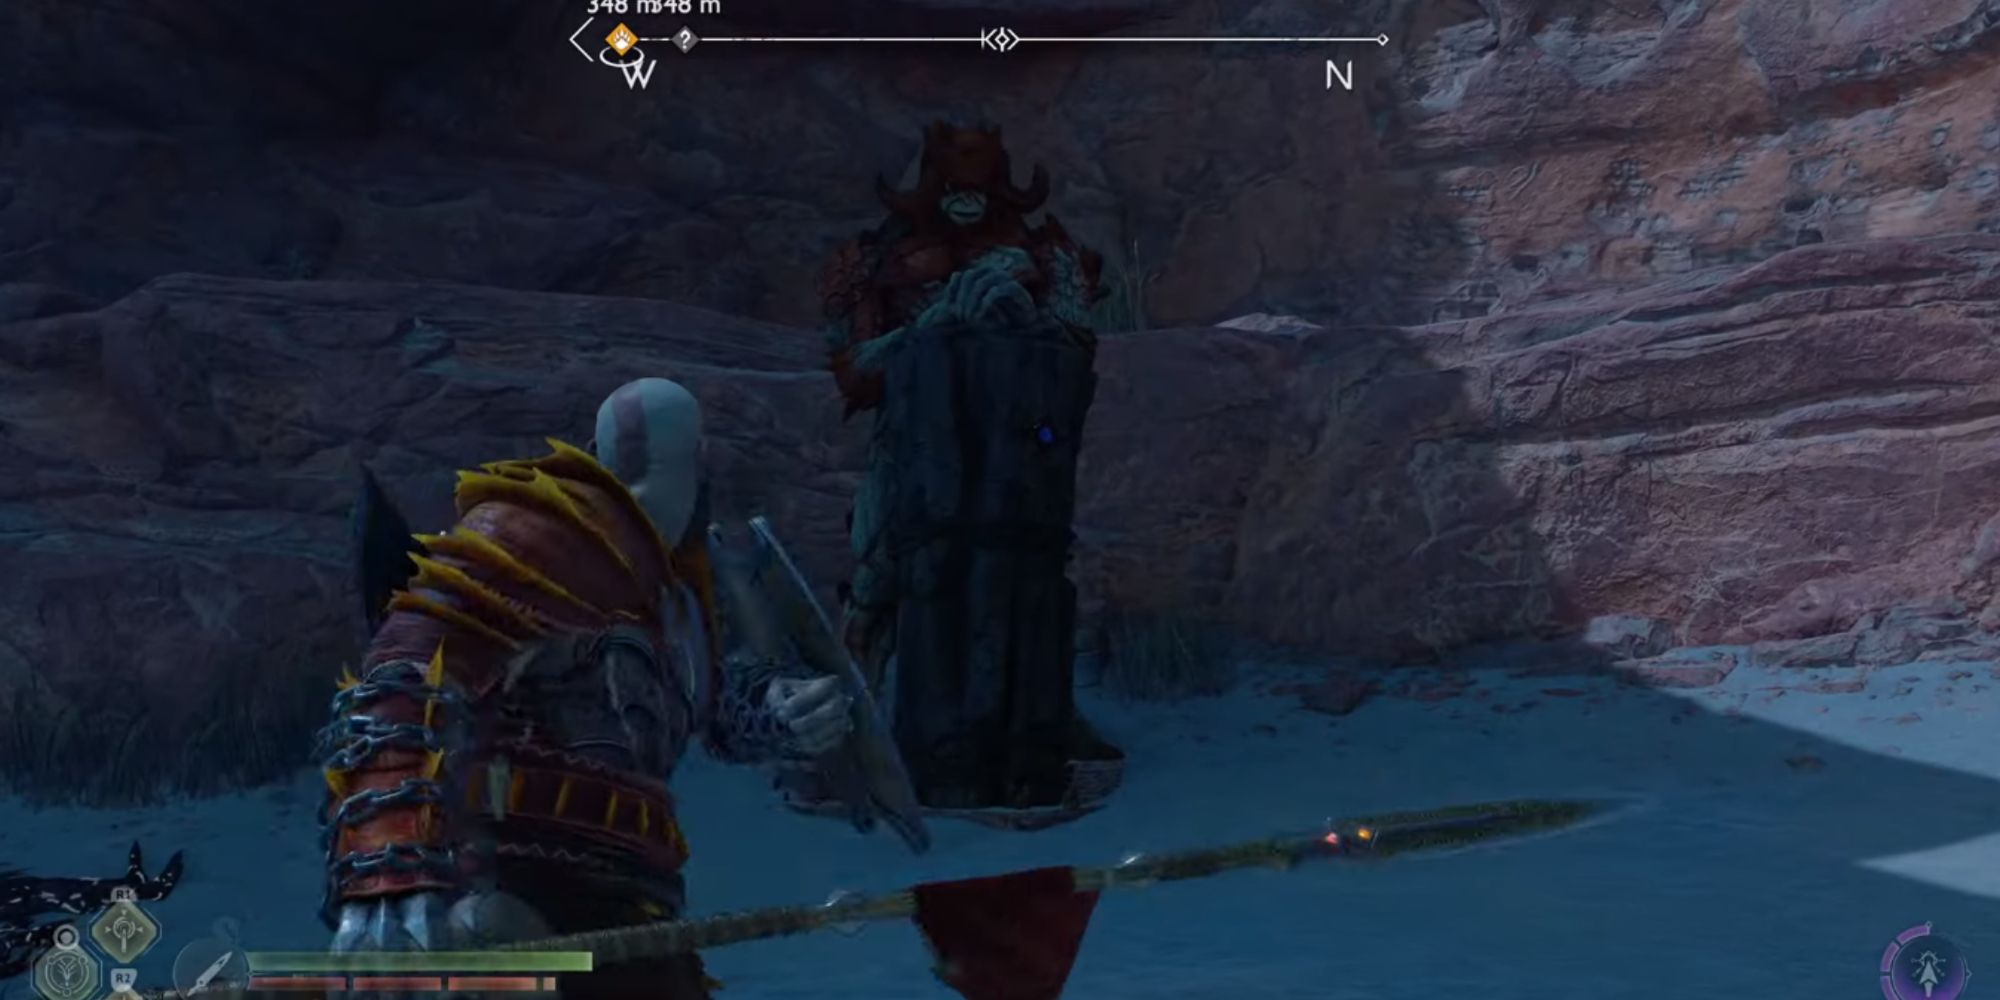 Image showing Kratos approaching the Troll Statue.